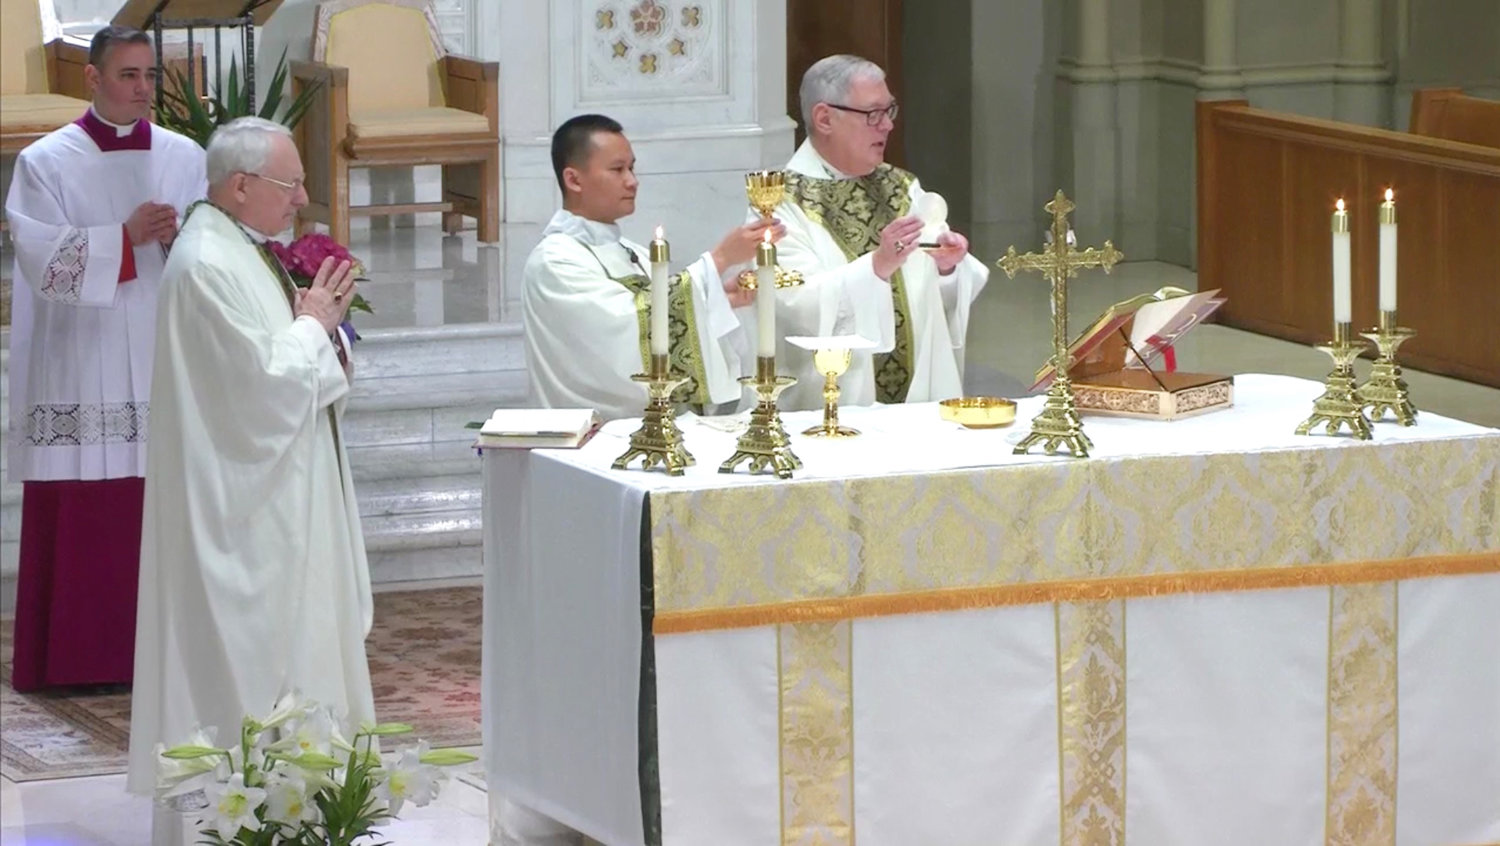 Auxiliary Bishop Robert C. Evans, left, and Bishop Thomas J. Tobin, right, concelebrate, while Deacon Hiep Nguyen, center, assists at the Mass.